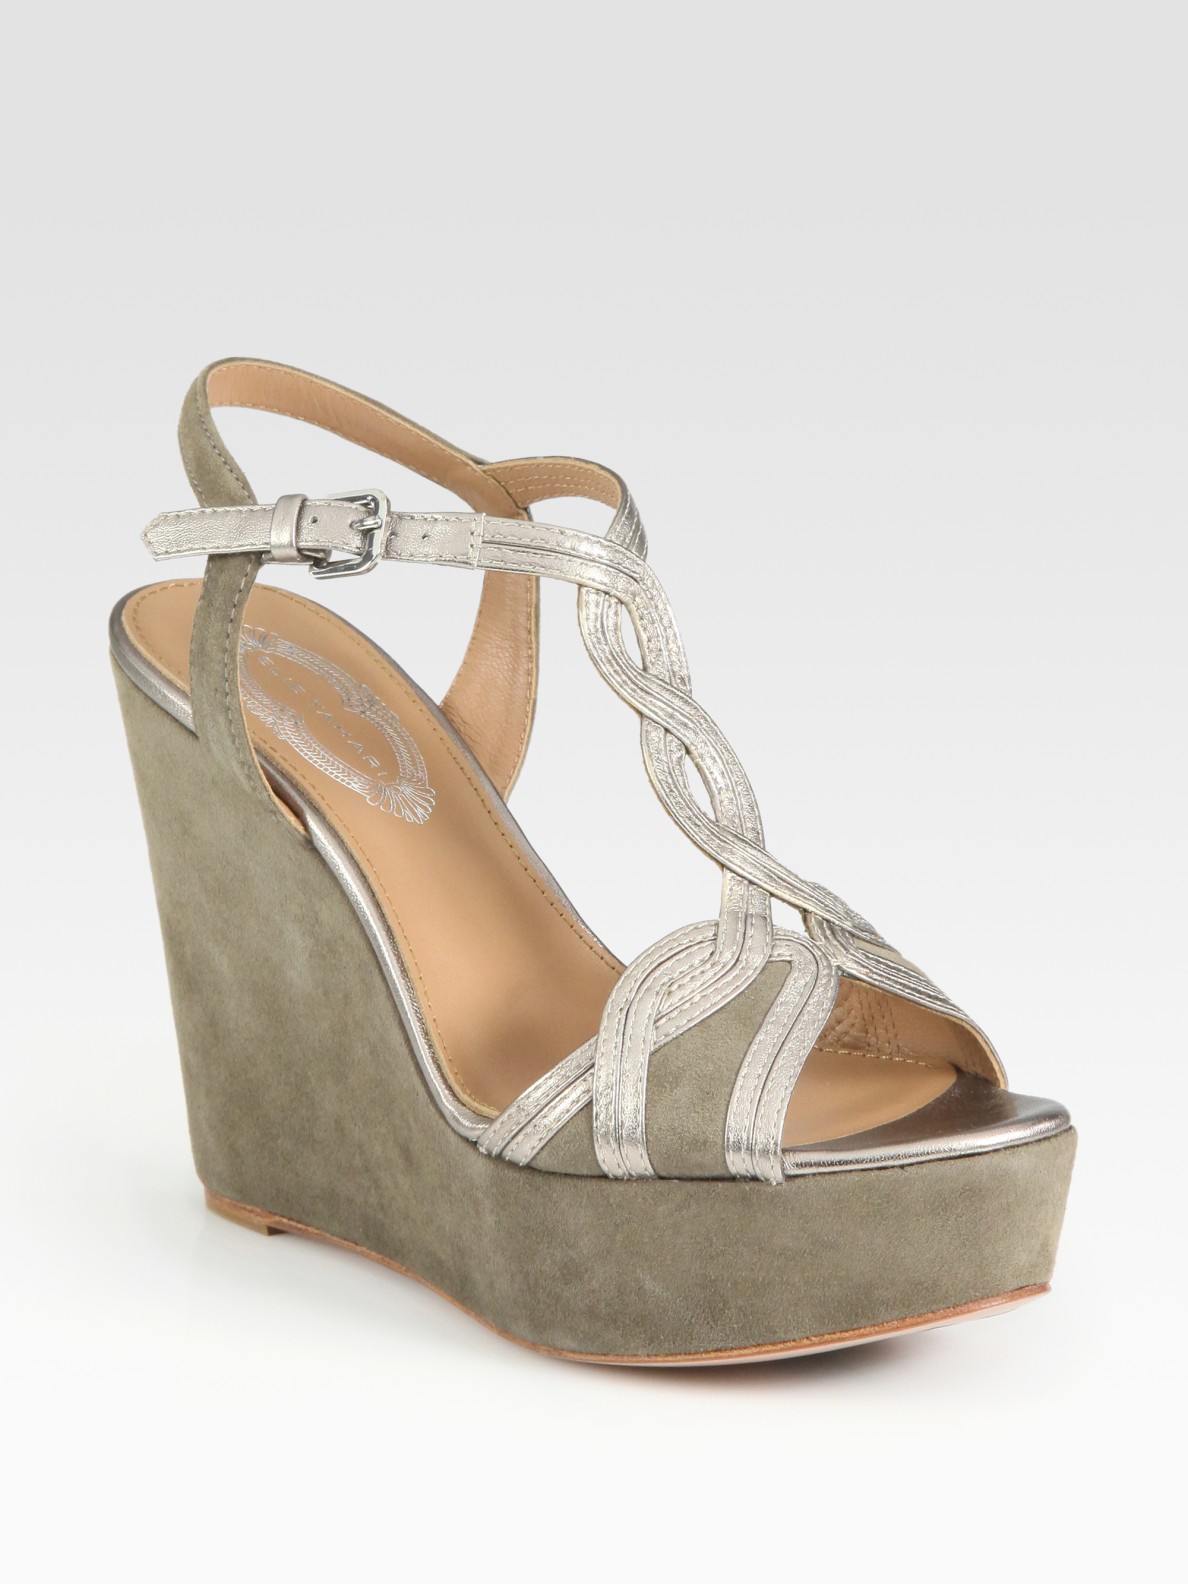 Elie Tahari Lynette Suede and Metallic Leather Wedge Sandals in Gray ...